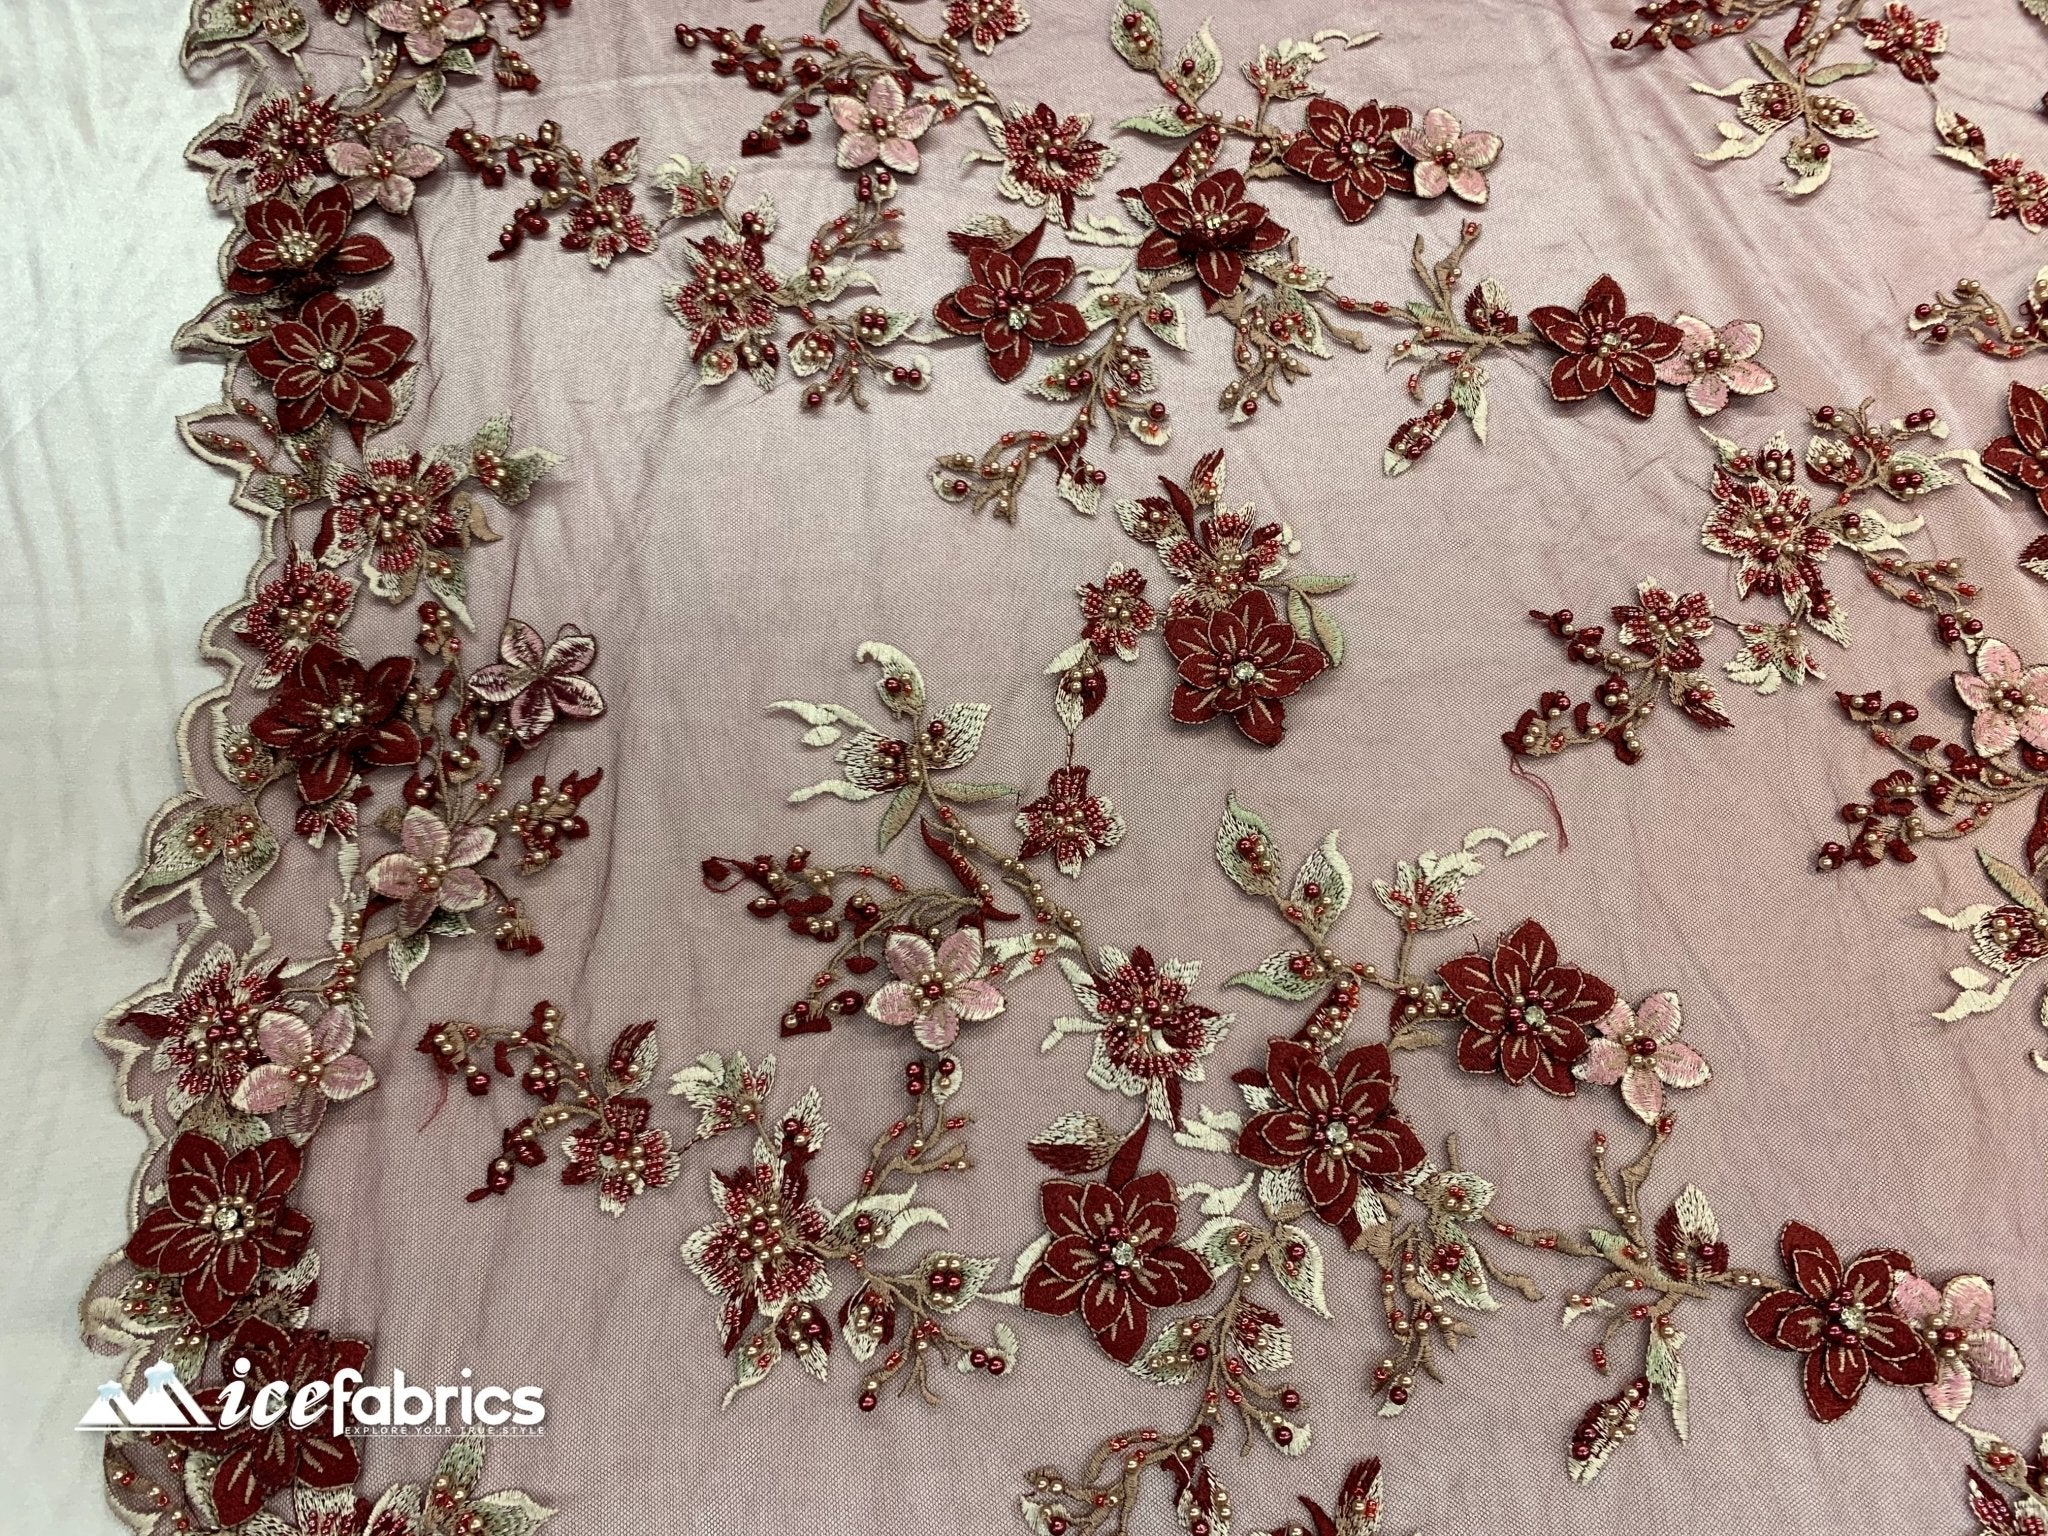 Flowers Embroidered Beaded Fabric/ Mesh Lace Fabric/ Bridal Fabric/ICE FABRICSICE FABRICSBurgundyFlowers Embroidered Beaded Fabric/ Mesh Lace Fabric/ Bridal Fabric/ ICE FABRICS Burgundy